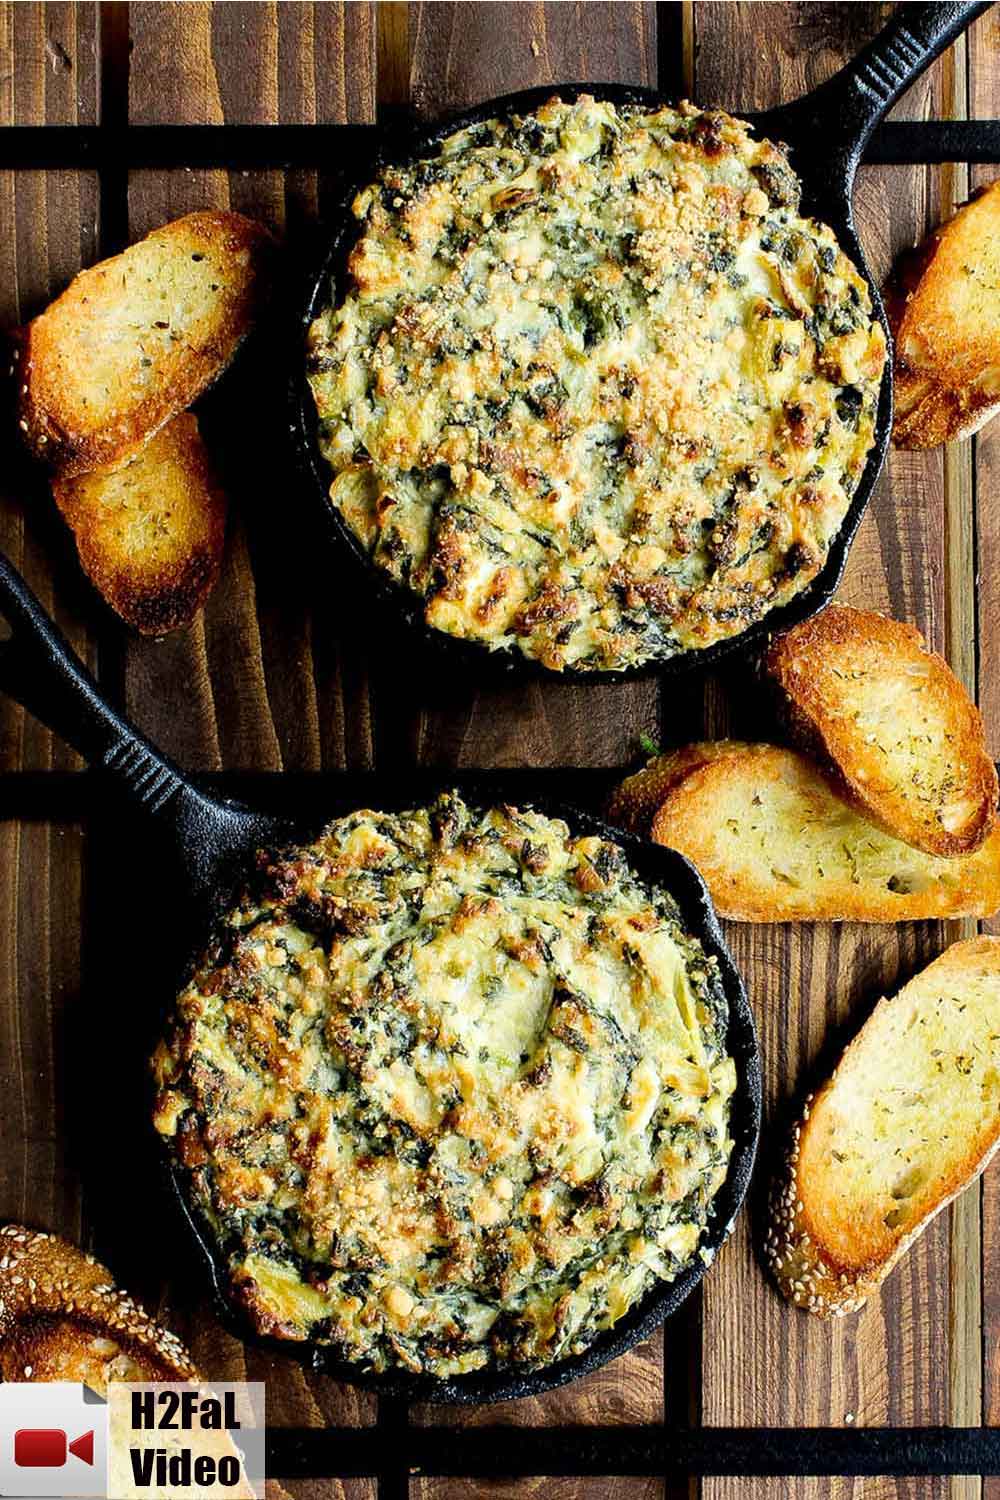 Spinach and artichoke dip in two small cast iron skillets on a wooden table. 